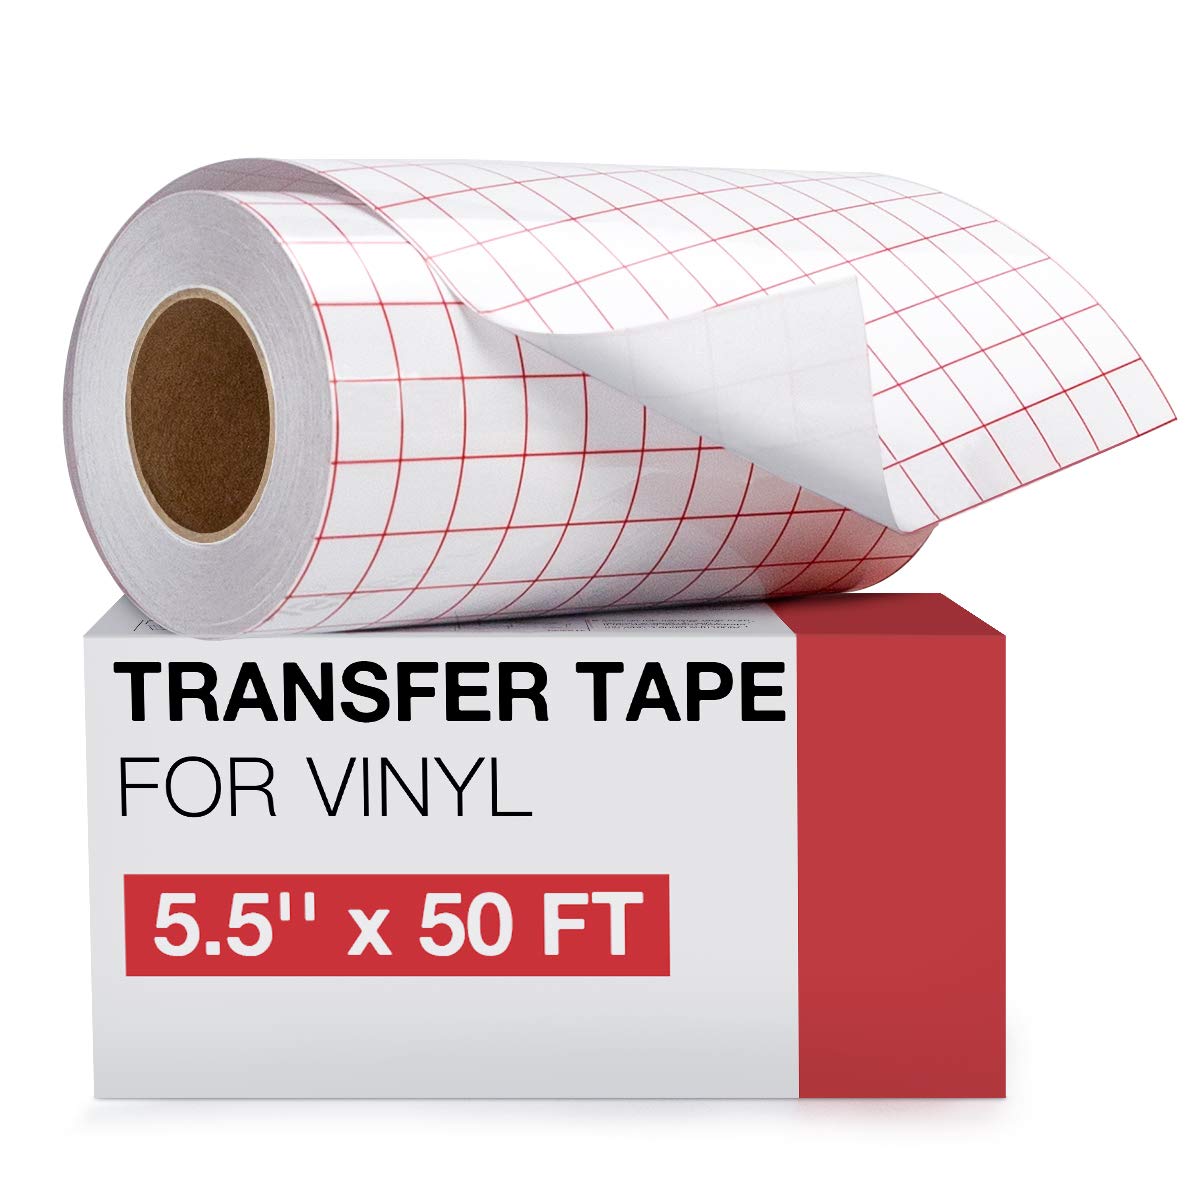 HTVRONT Transfer Tape for Vinyl- 5.5" x 50 FT w/Red Alignment Grid for Cricut Joy and Cricut Adhesive Vinyl, Silhouette Cameo Transfer Paper for